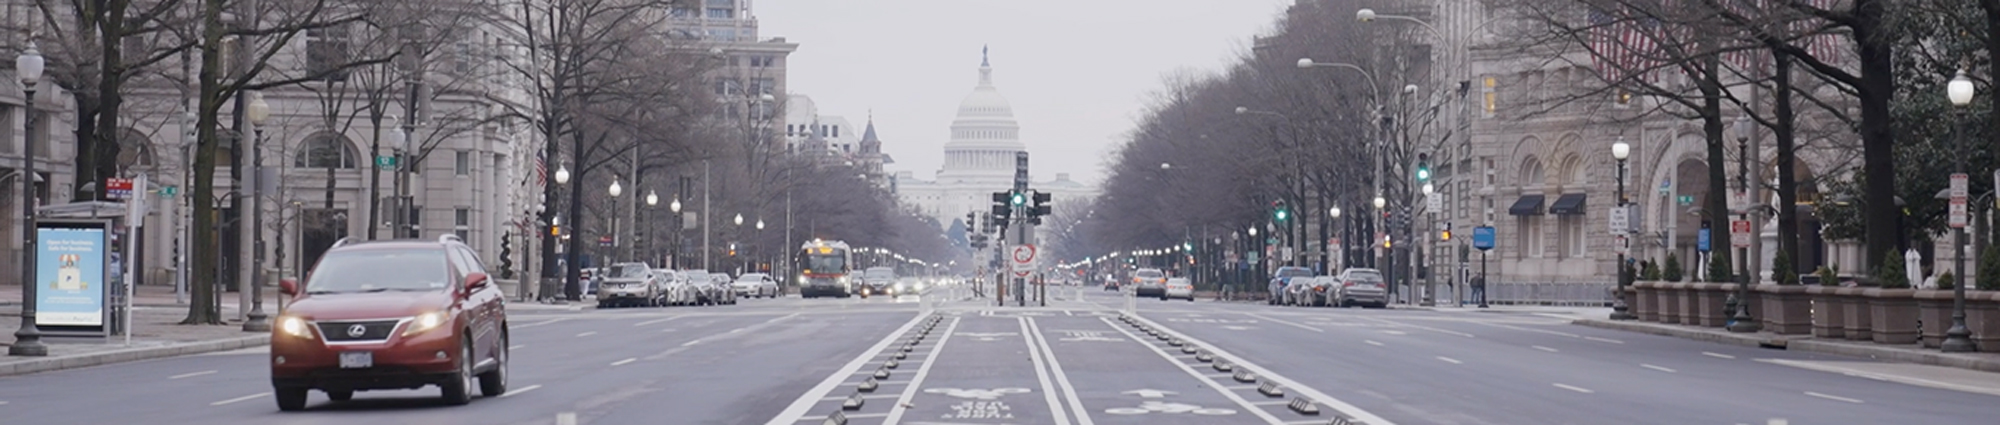 Street view of the Capitol building in D.C.